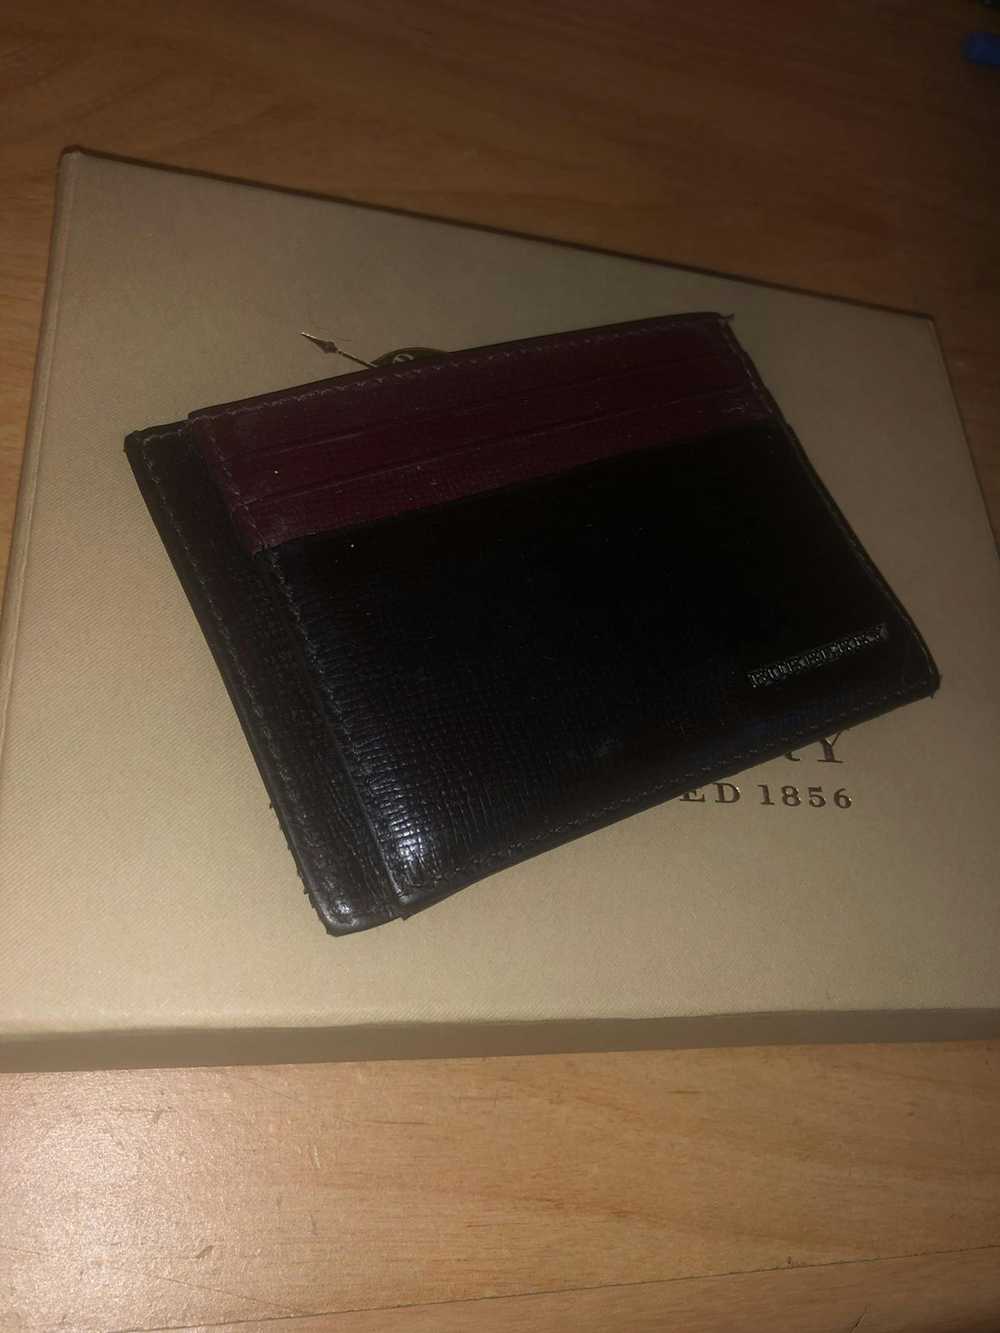 Burberry Authentic 9-Slot Burberry Card holder - image 2